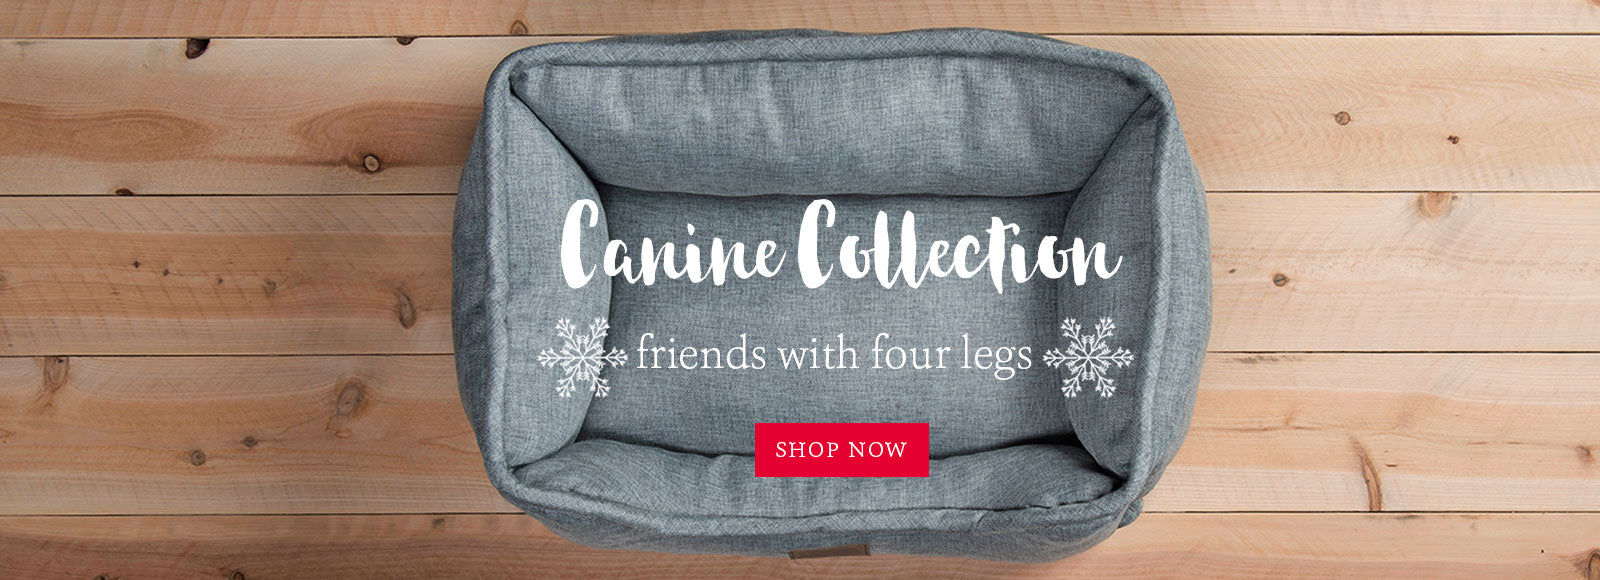 The Normal Brand Canine Collection